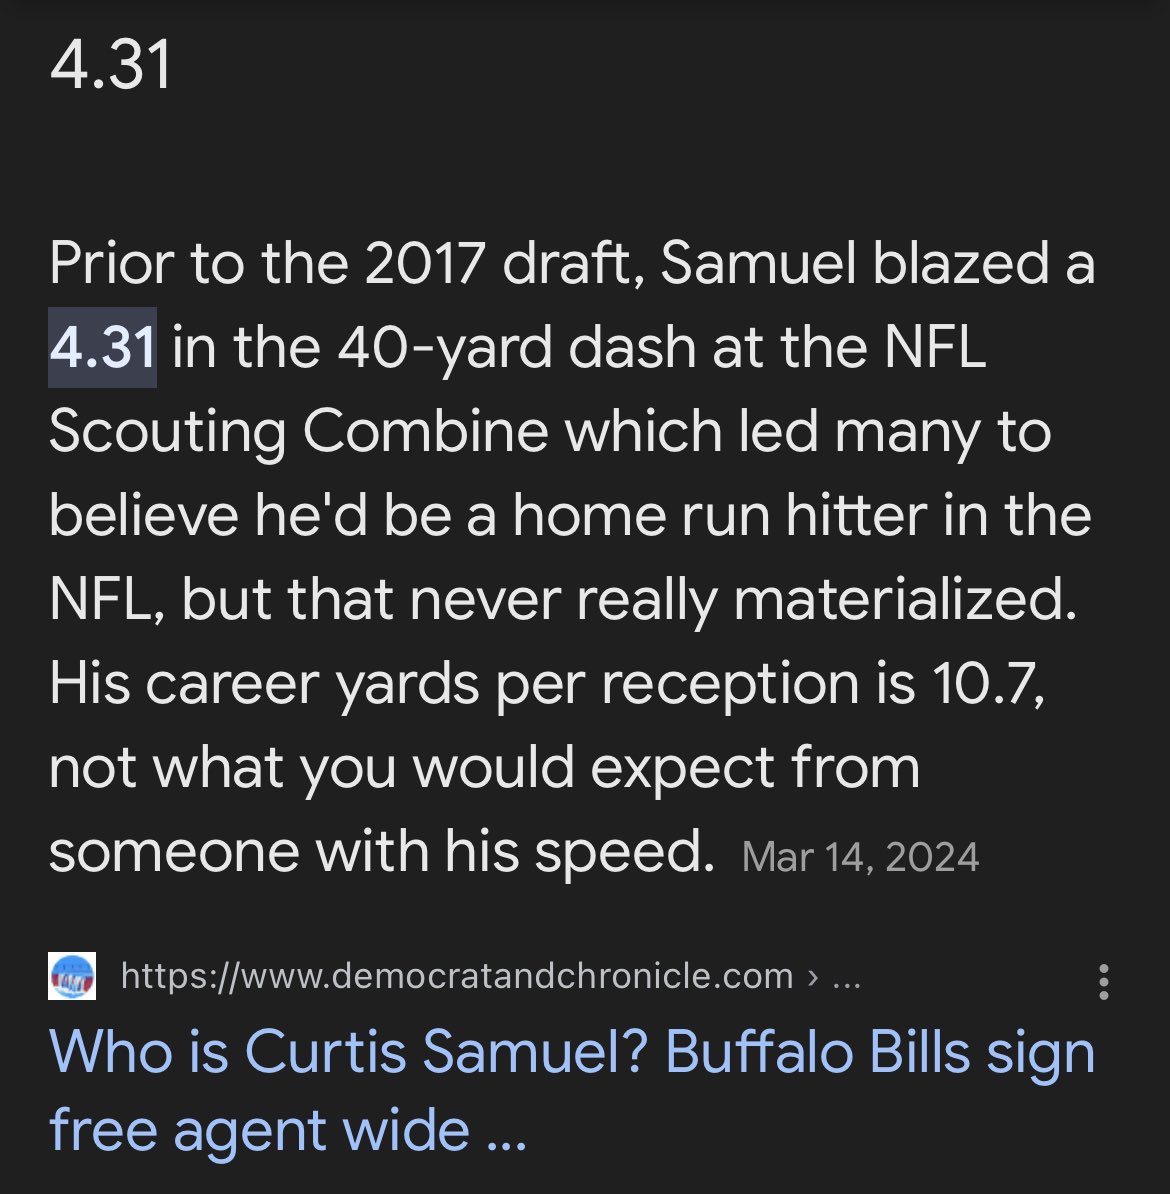 People wanting a speedy WR in the Draft for the #Bills forgot we already got one